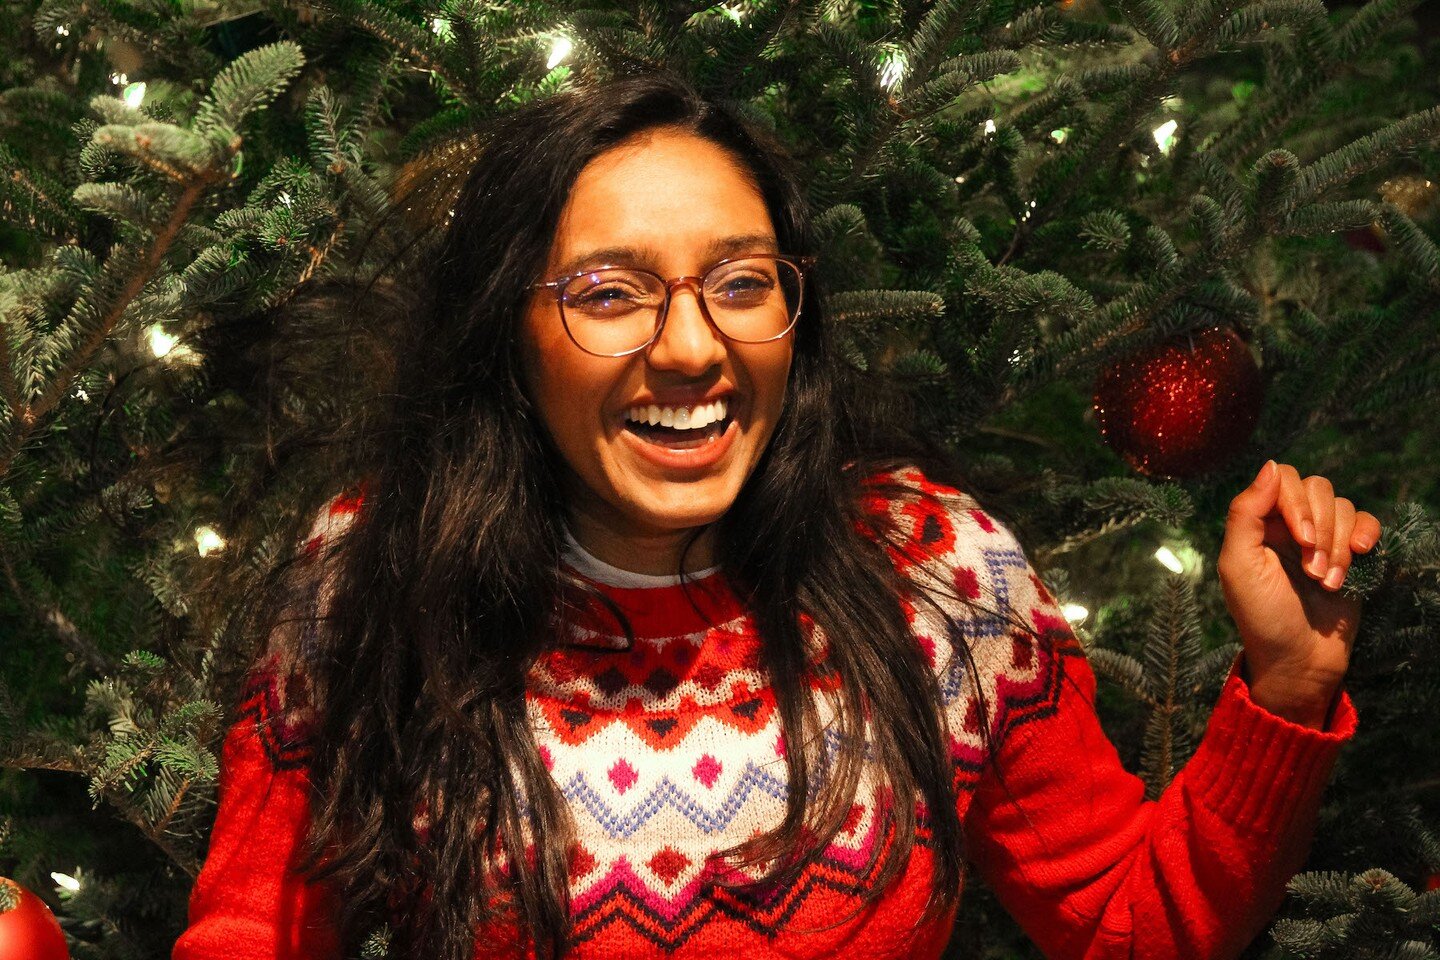 Available Now: Holiday card photo bookings! ❄️🌲 Book at www.kaylajanellecook.com/fandbphotog and send your loved ones warmth this holiday season that will last well into the New Year.
.
Alt Text:
Image 1: Anita smiles in front of a Christmas tree. S